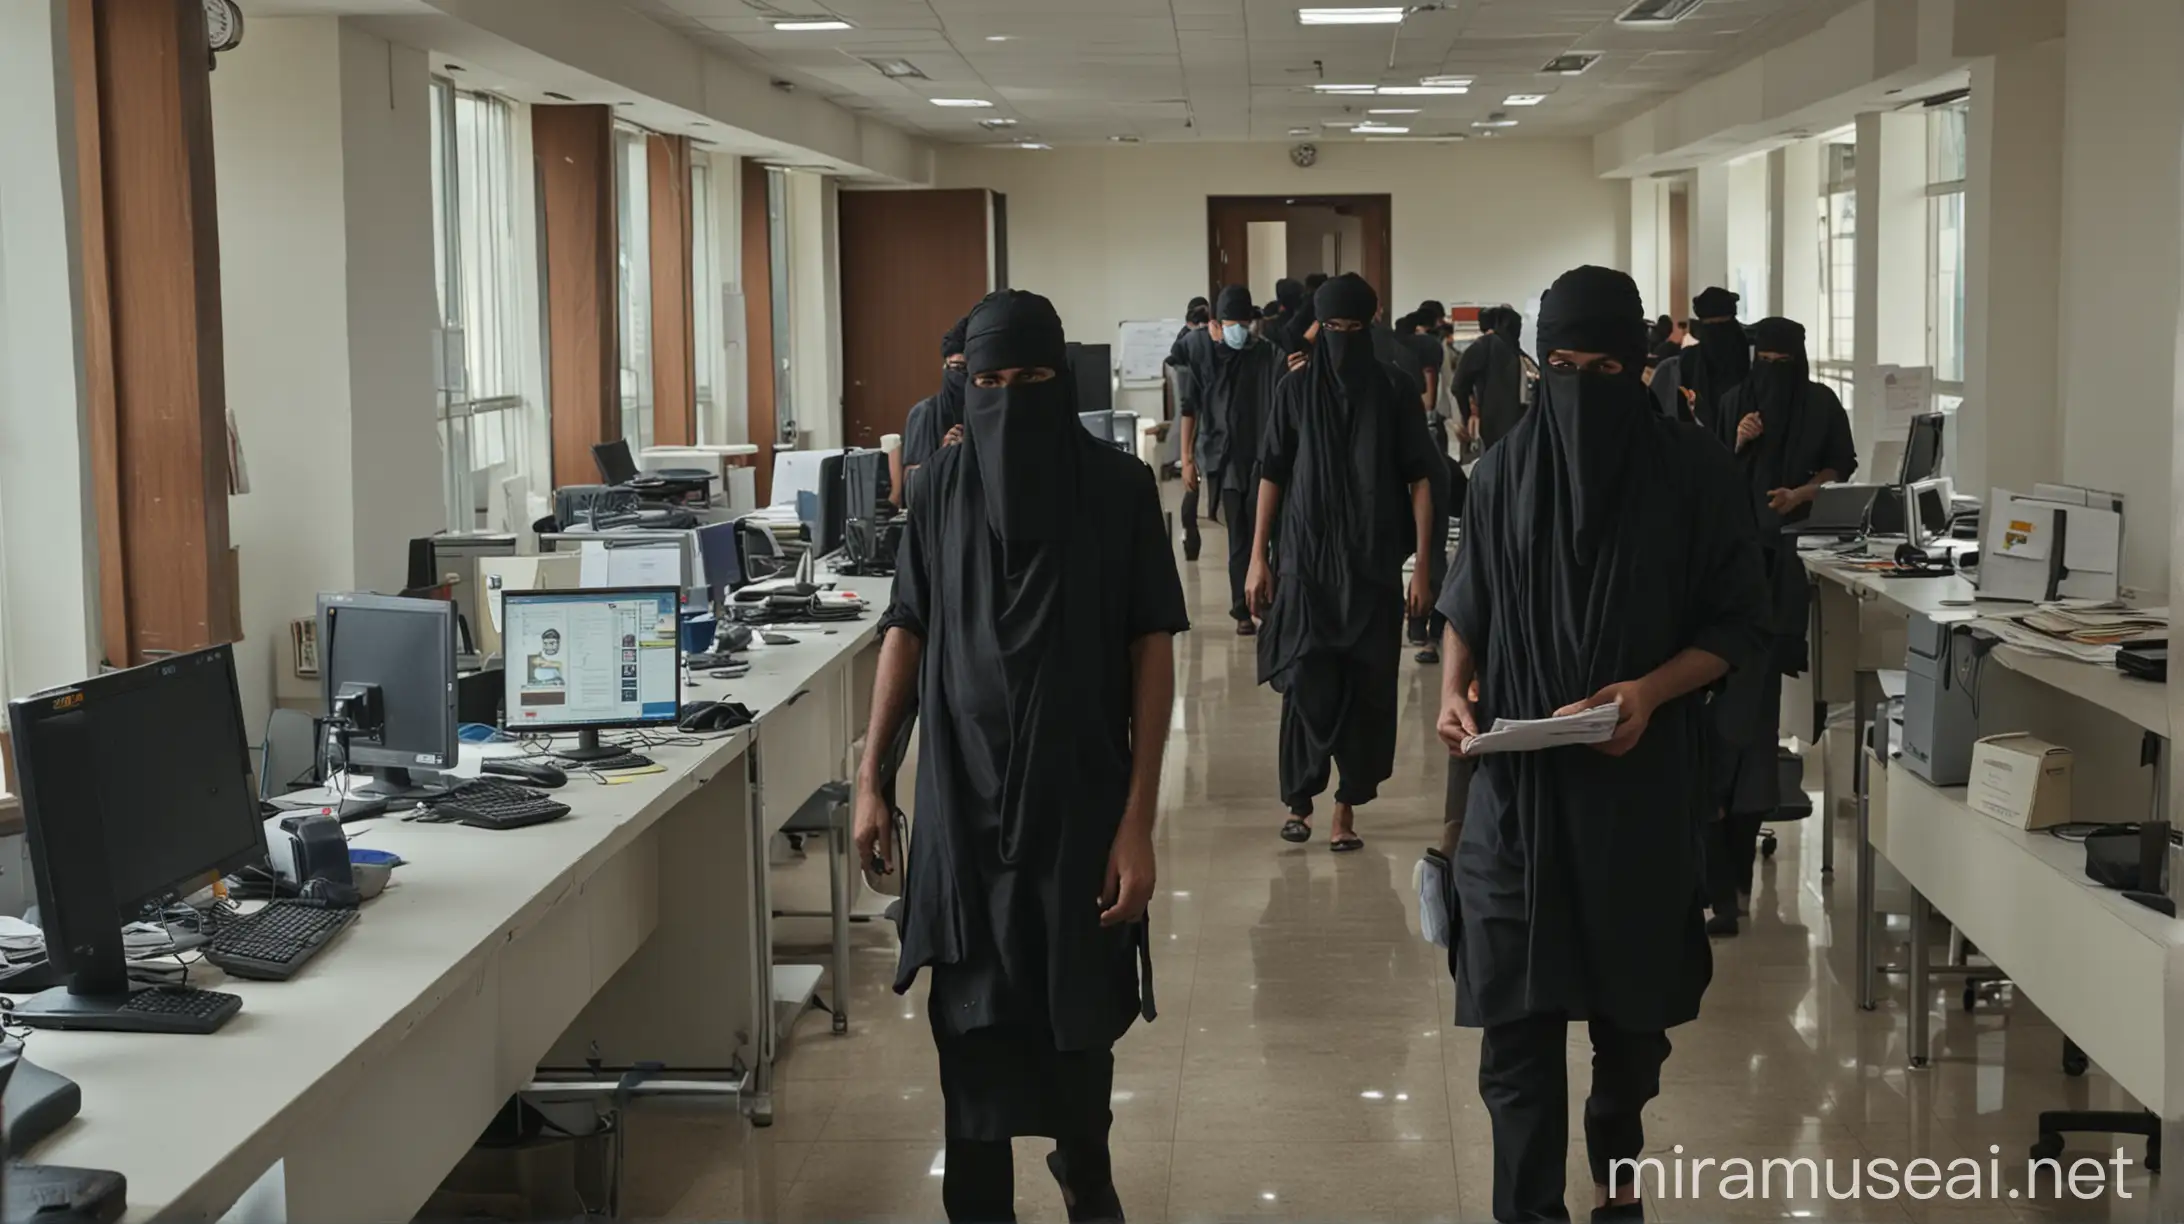 Indian Men in Black Attire Entering Government Office Scene of Office Workers Engaged in Tasks